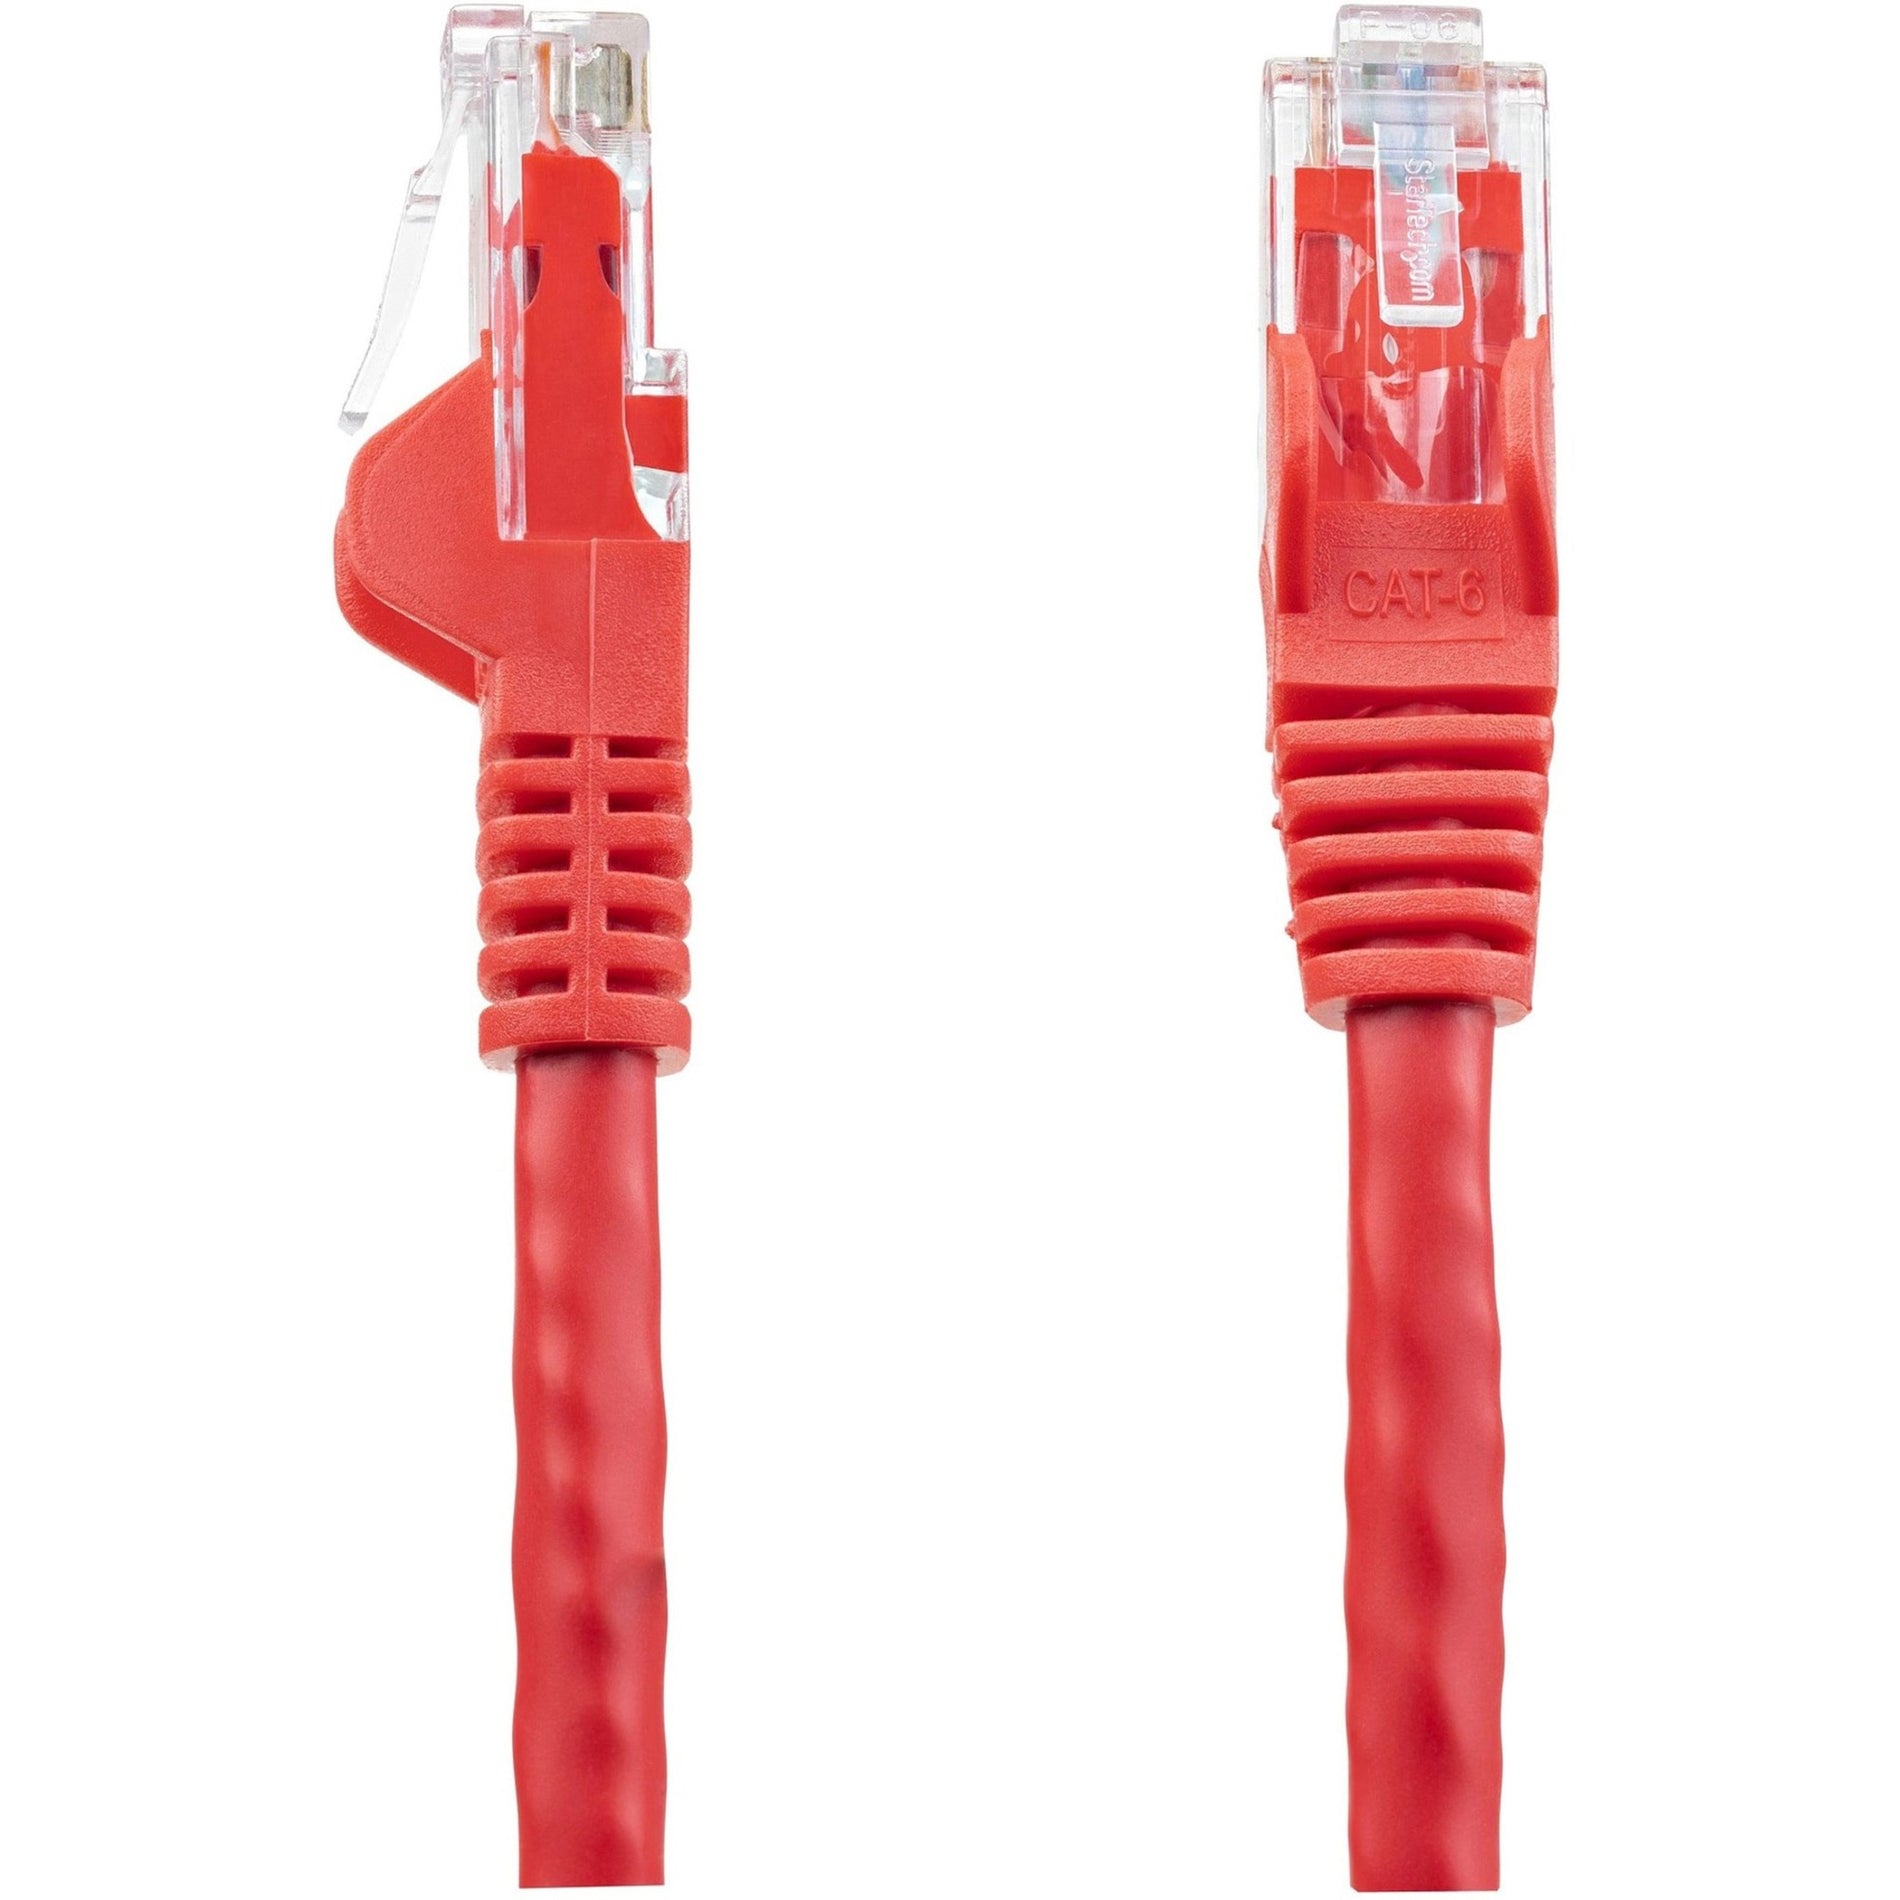 StarTech.com N6PATCH5RD Cat6 Patch Cable, 5ft Red Ethernet Cable, Snagless RJ45 Connectors